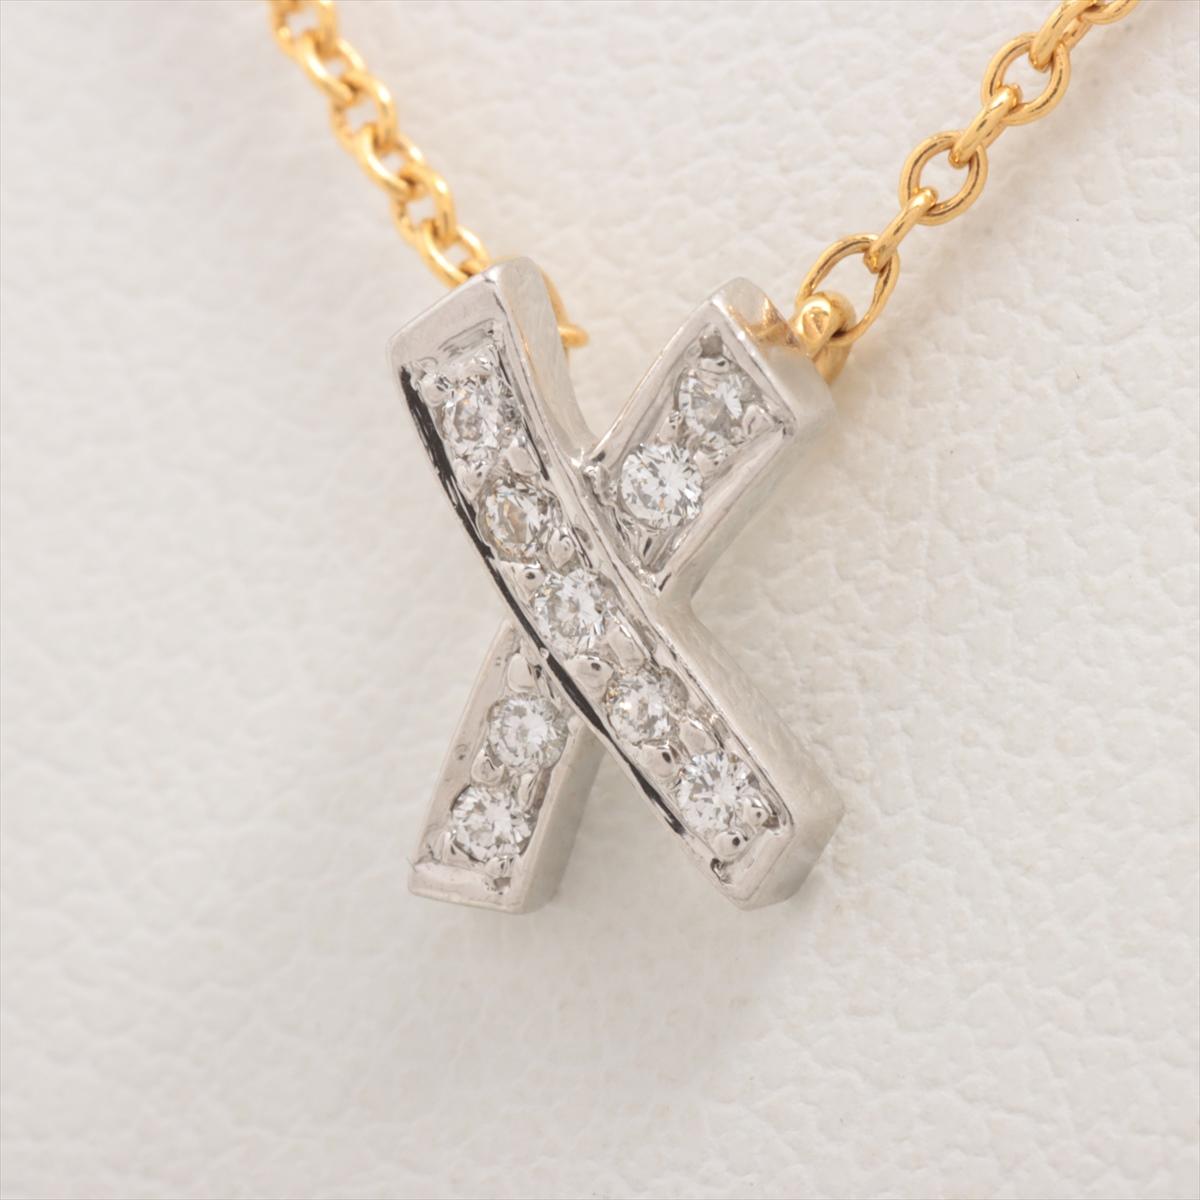 The Tiffany & Co. Paloma Picasso Kiss X Diamond Pendant Necklace a captivating and romantic accessory that combines the iconic Kiss X motif with the timeless sparkle of diamonds. Meticulously crafted by Tiffany & Co. and designed by Paloma Picasso,